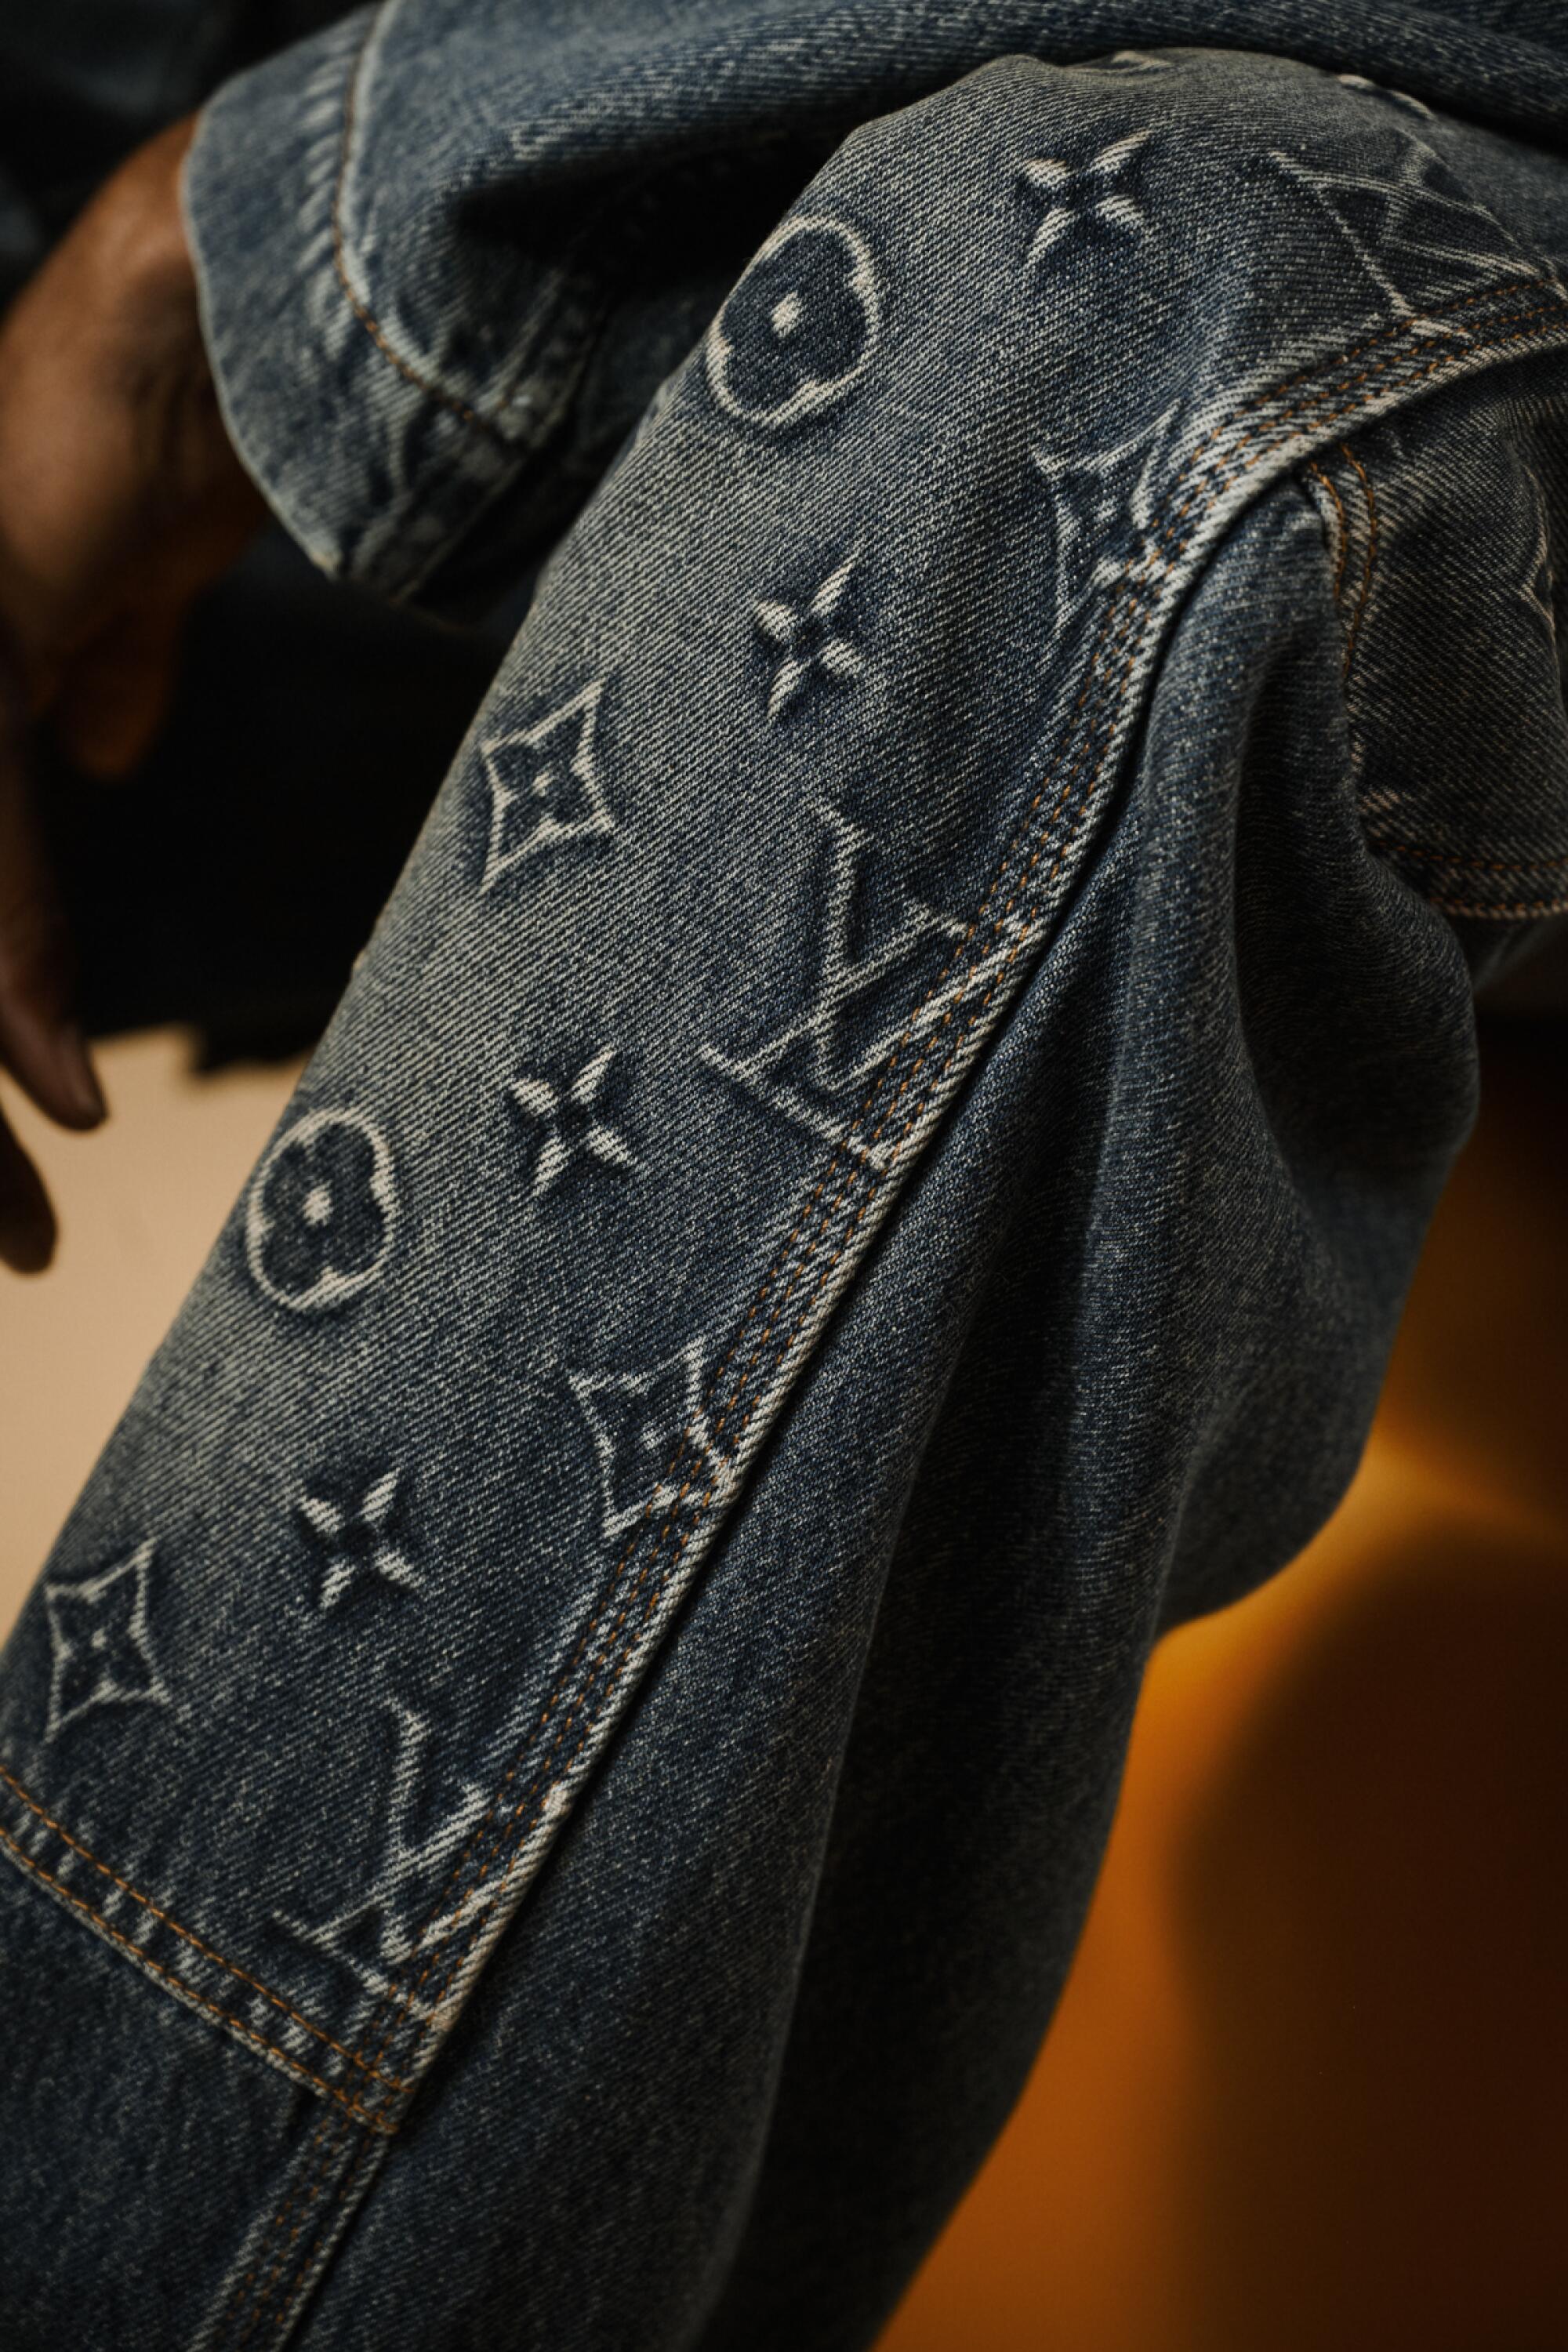 A detail of patterned Louis Vuitton jeans.